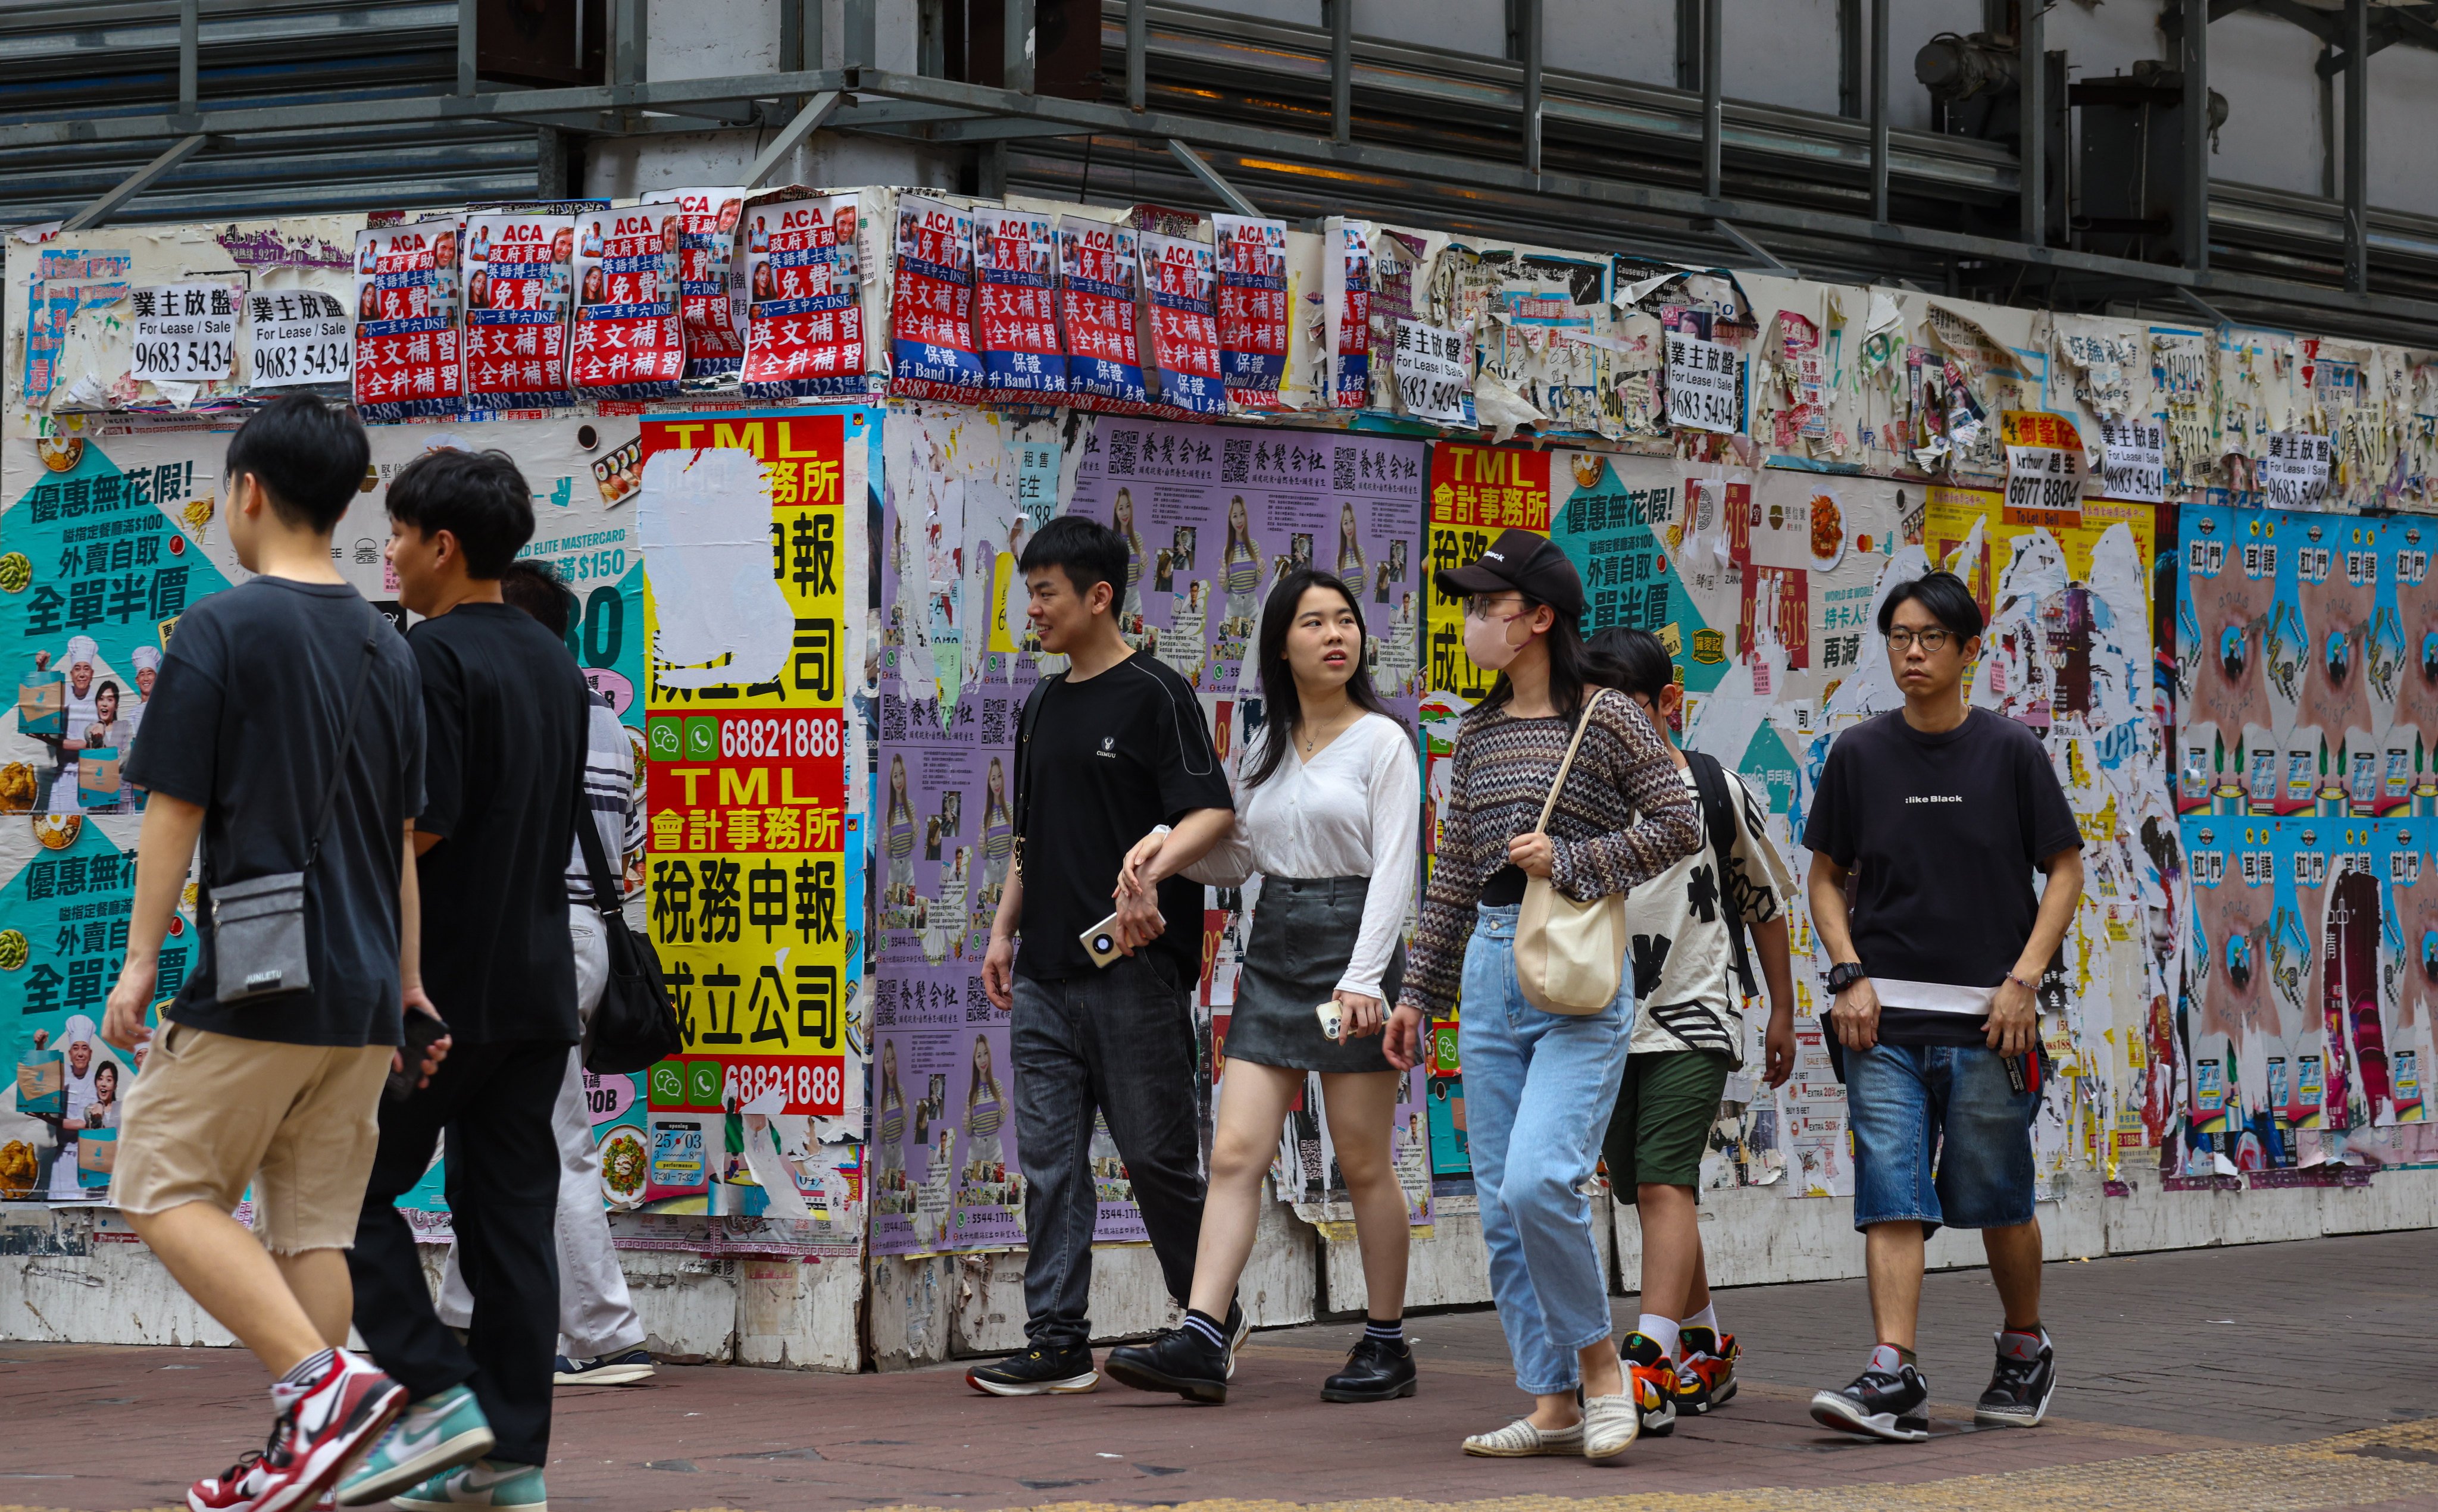 Pedestrians walk past a boarded-up shop as retail and travel sector experts warn poor pay rises could hurt the industries. Photo: Yik Yeung-man